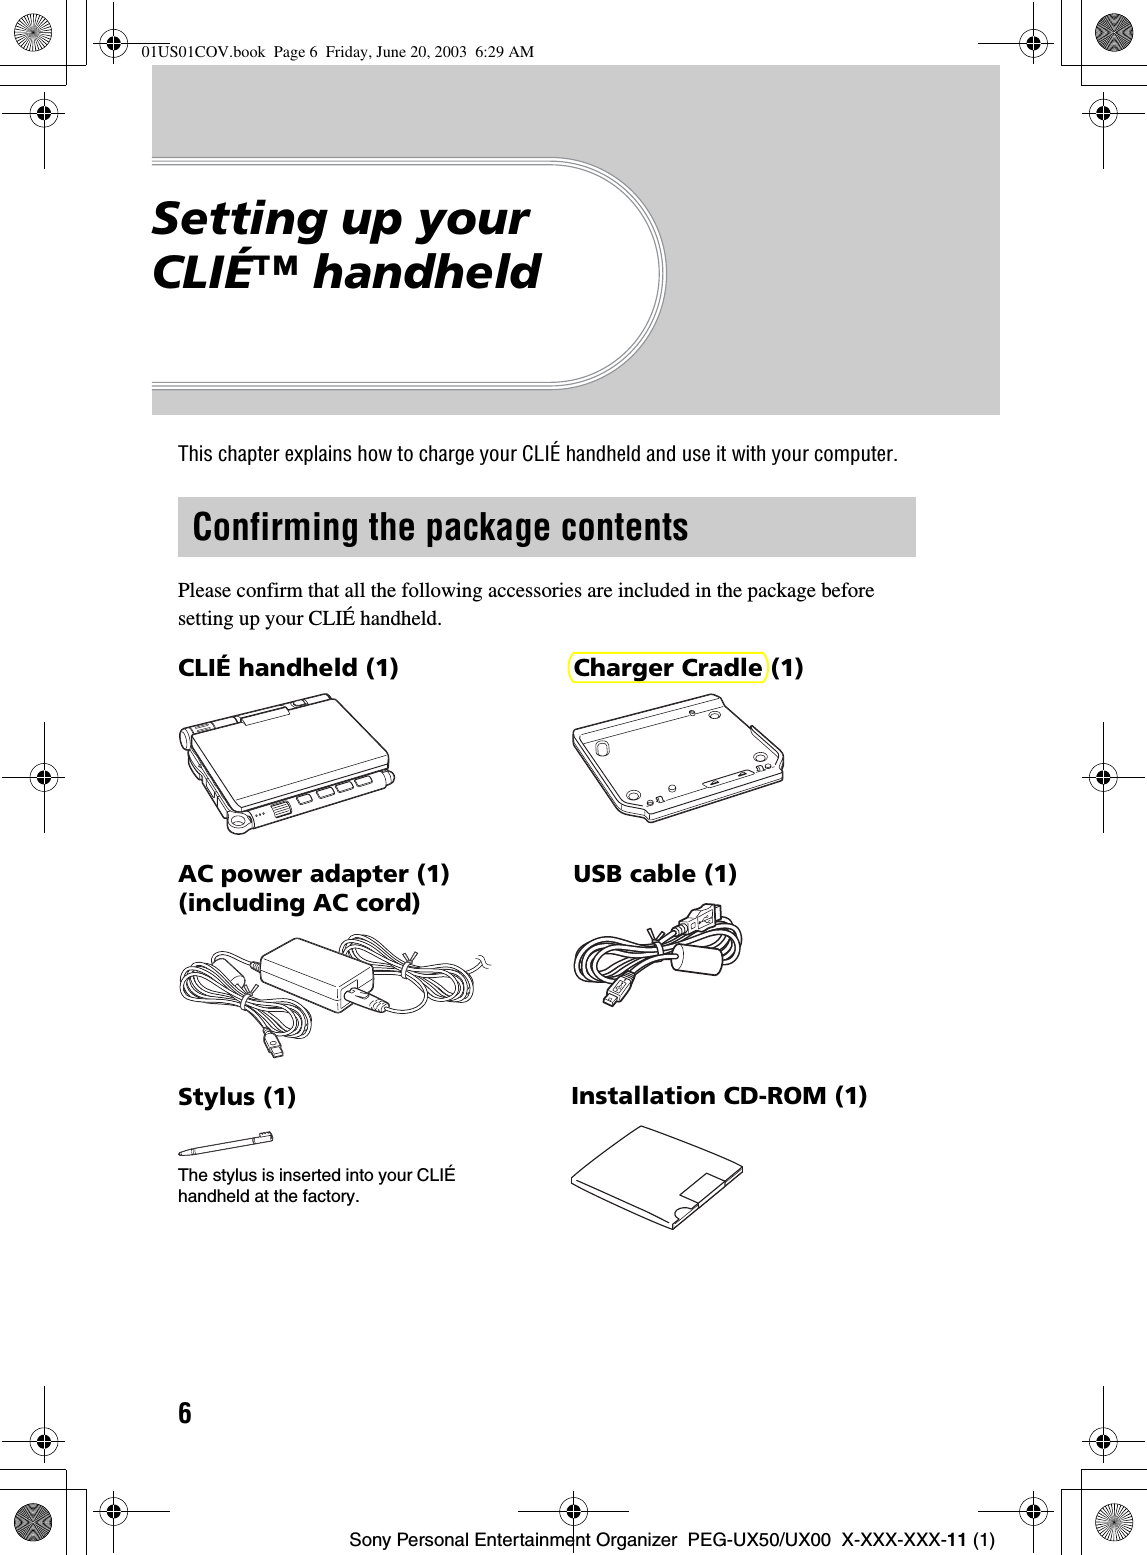 6Sony Personal Entertainment Organizer  PEG-UX50/UX00  X-XXX-XXX-11 (1)Setting up your CLIÉ™ handheldThis chapter explains how to charge your CLIÉ handheld and use it with your computer.Please confirm that all the following accessories are included in the package before setting up your CLIÉ handheld.Confirming the package contentsCLIÉ handheld (1) Charger Cradle (1)AC power adapter (1) (including AC cord)USB cable (1)Stylus (1)The stylus is inserted into your CLIÉ handheld at the factory.Installation CD-ROM (1)01US01COV.book  Page 6  Friday, June 20, 2003  6:29 AM